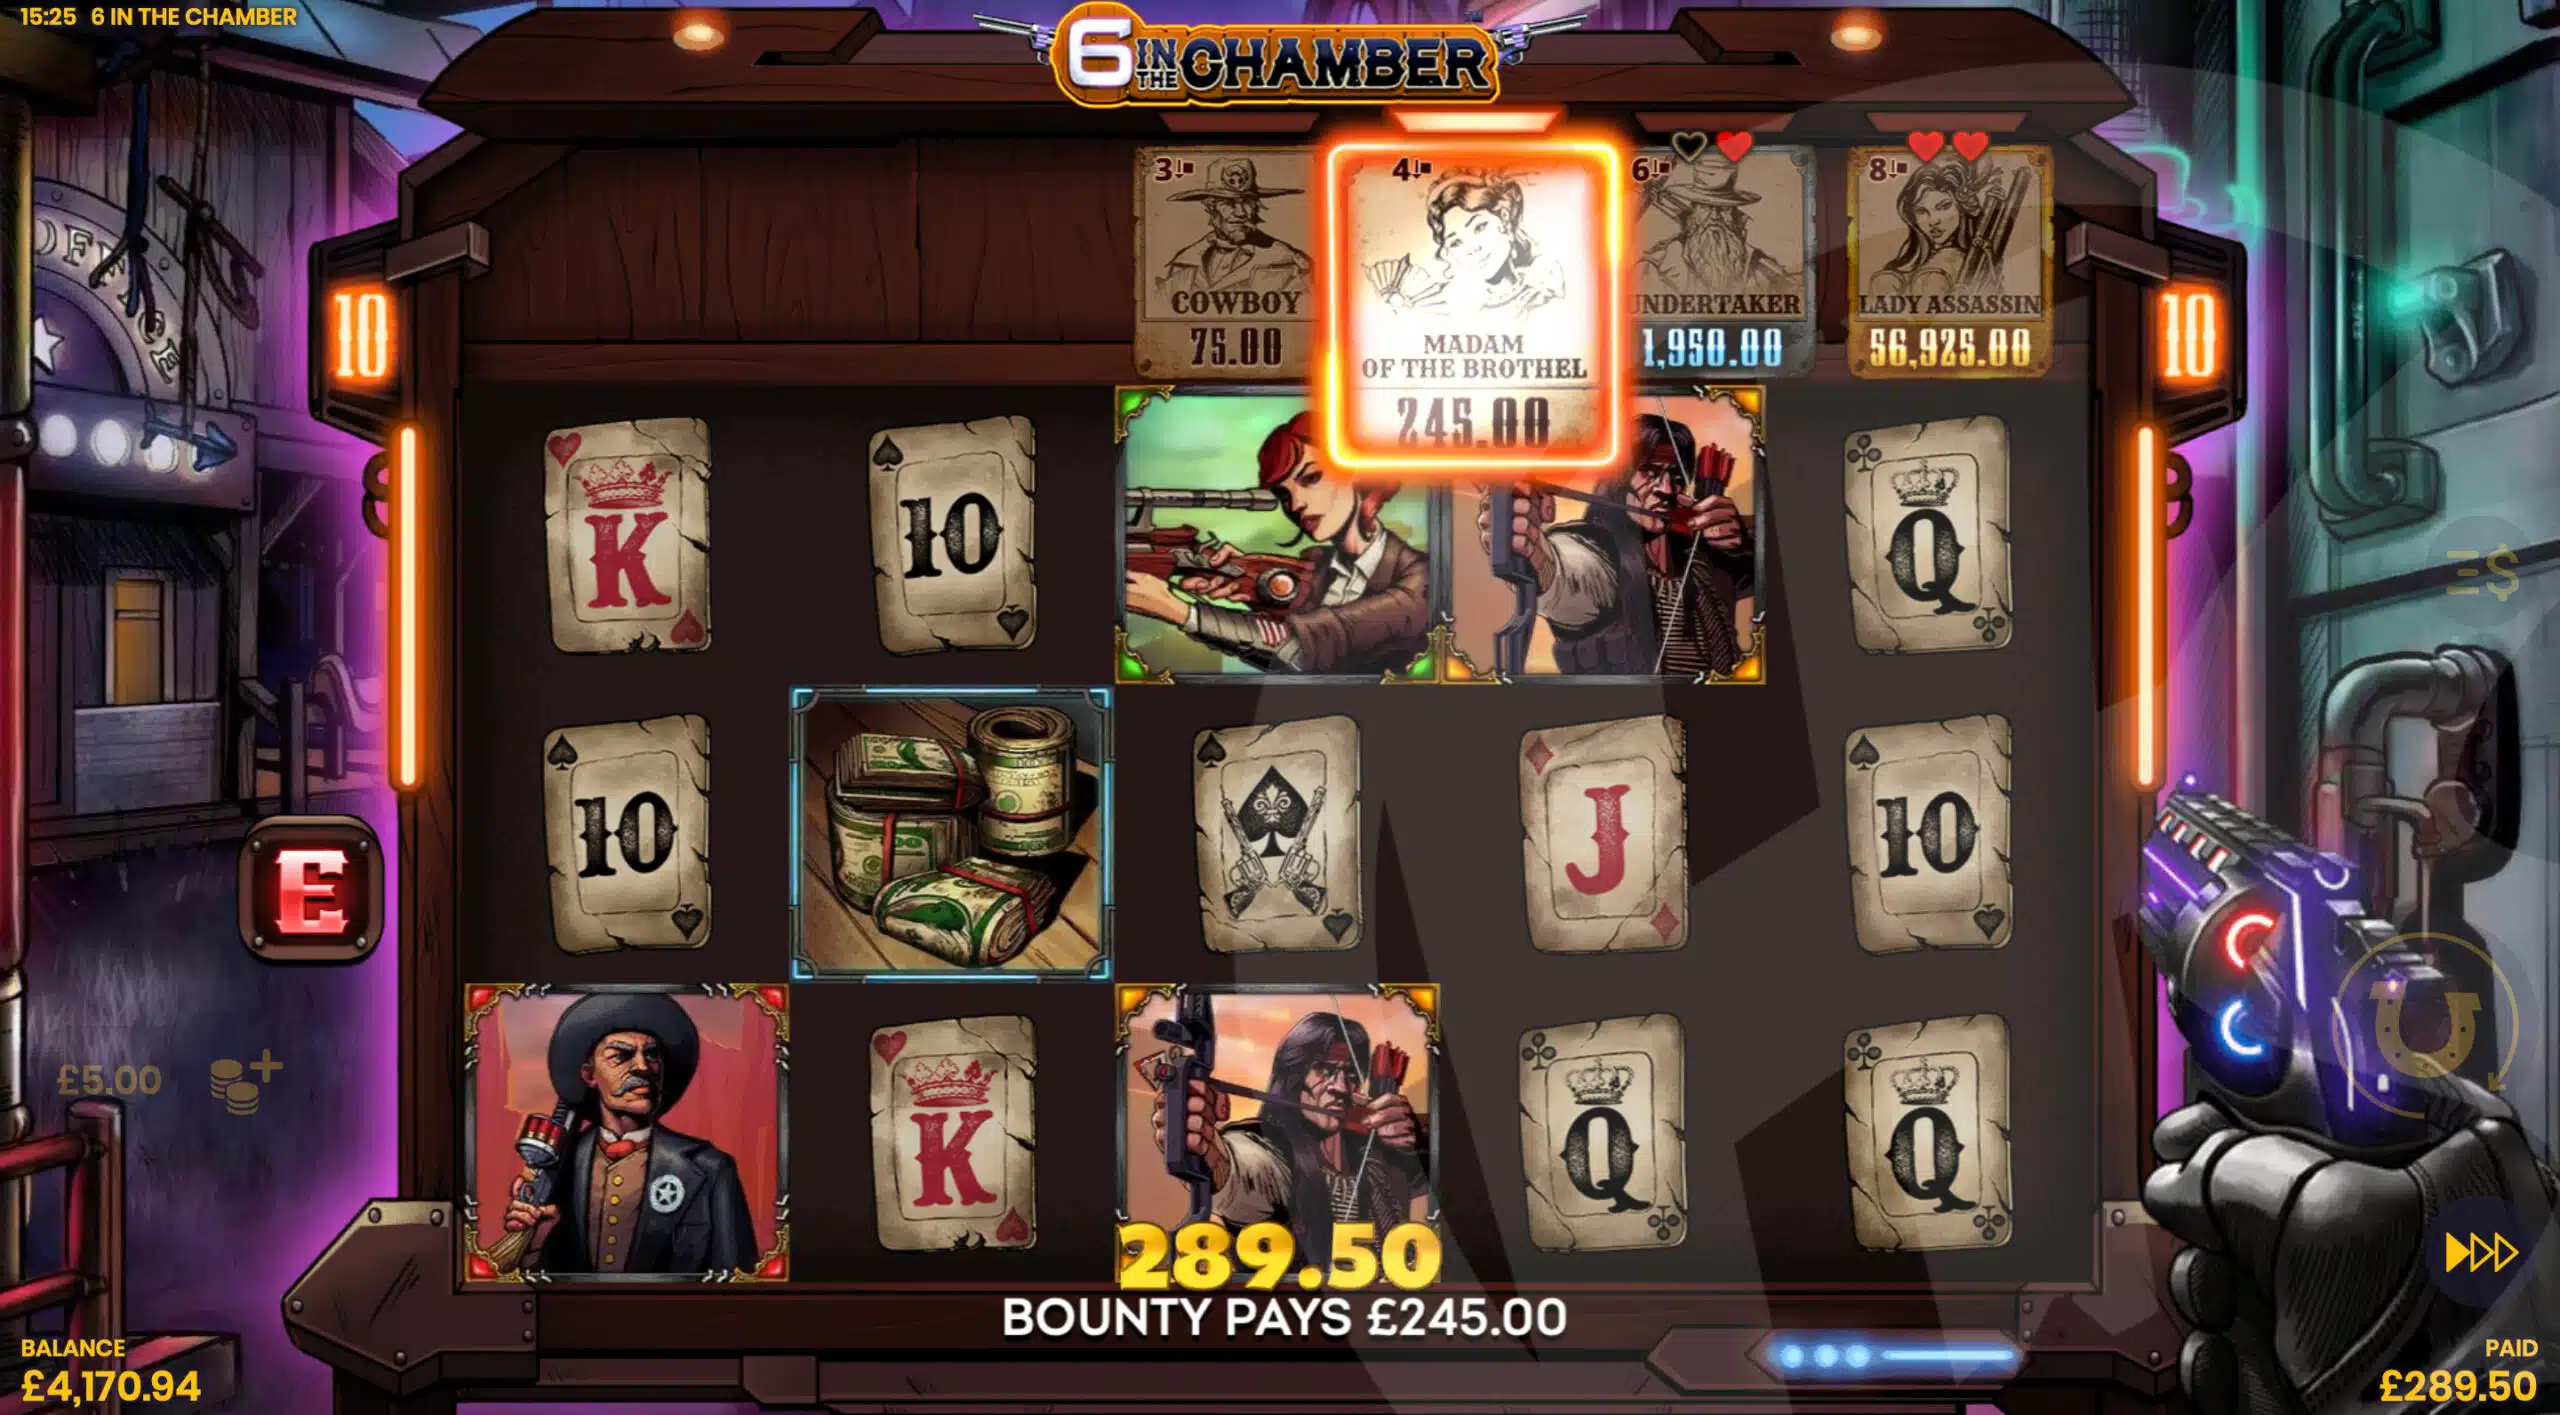 6 In The Chamber Free Spins - Elite Mode